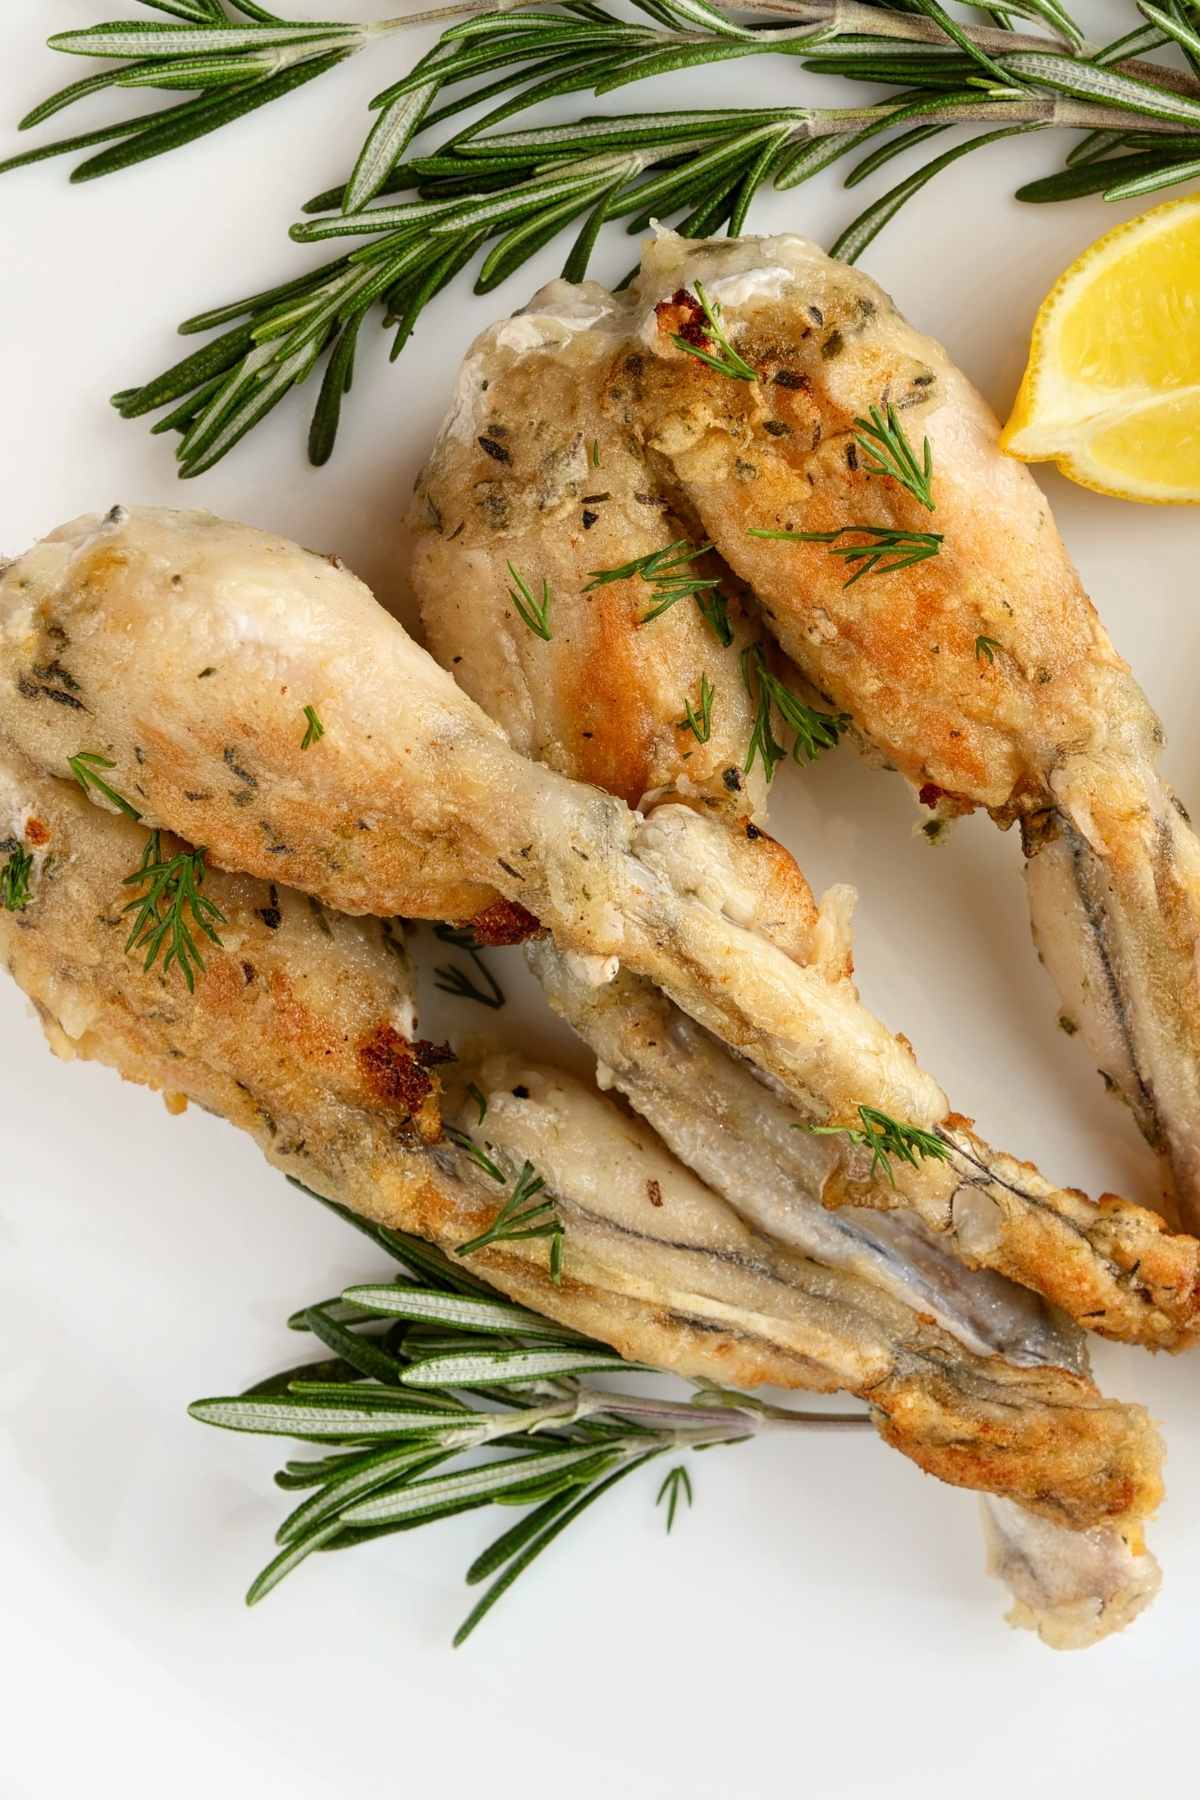 Crispy on the outside and tender on the inside, these fried frog legs are a perfect appetizer that’s easy to make and sure to impress. The secret is to marinate before you cook, resulting in a succulent texture and unbelievable flavor. Within less than 30 minutes, you’ll be serving up a plate of tender and flavorful frog legs.